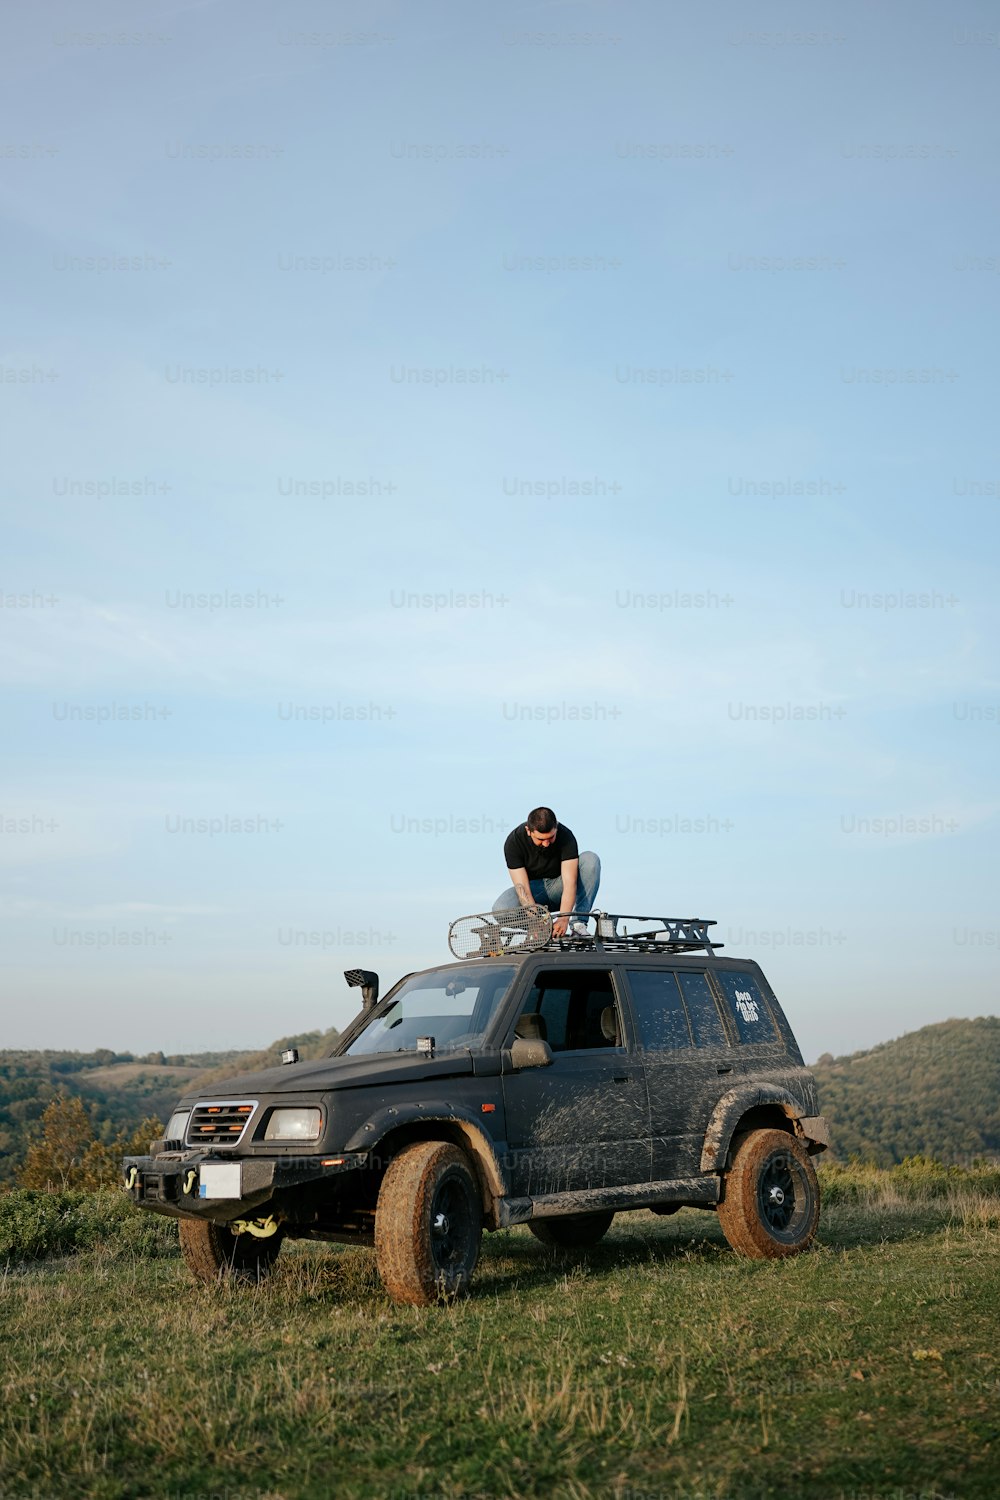 a person on top of a vehicle in a field